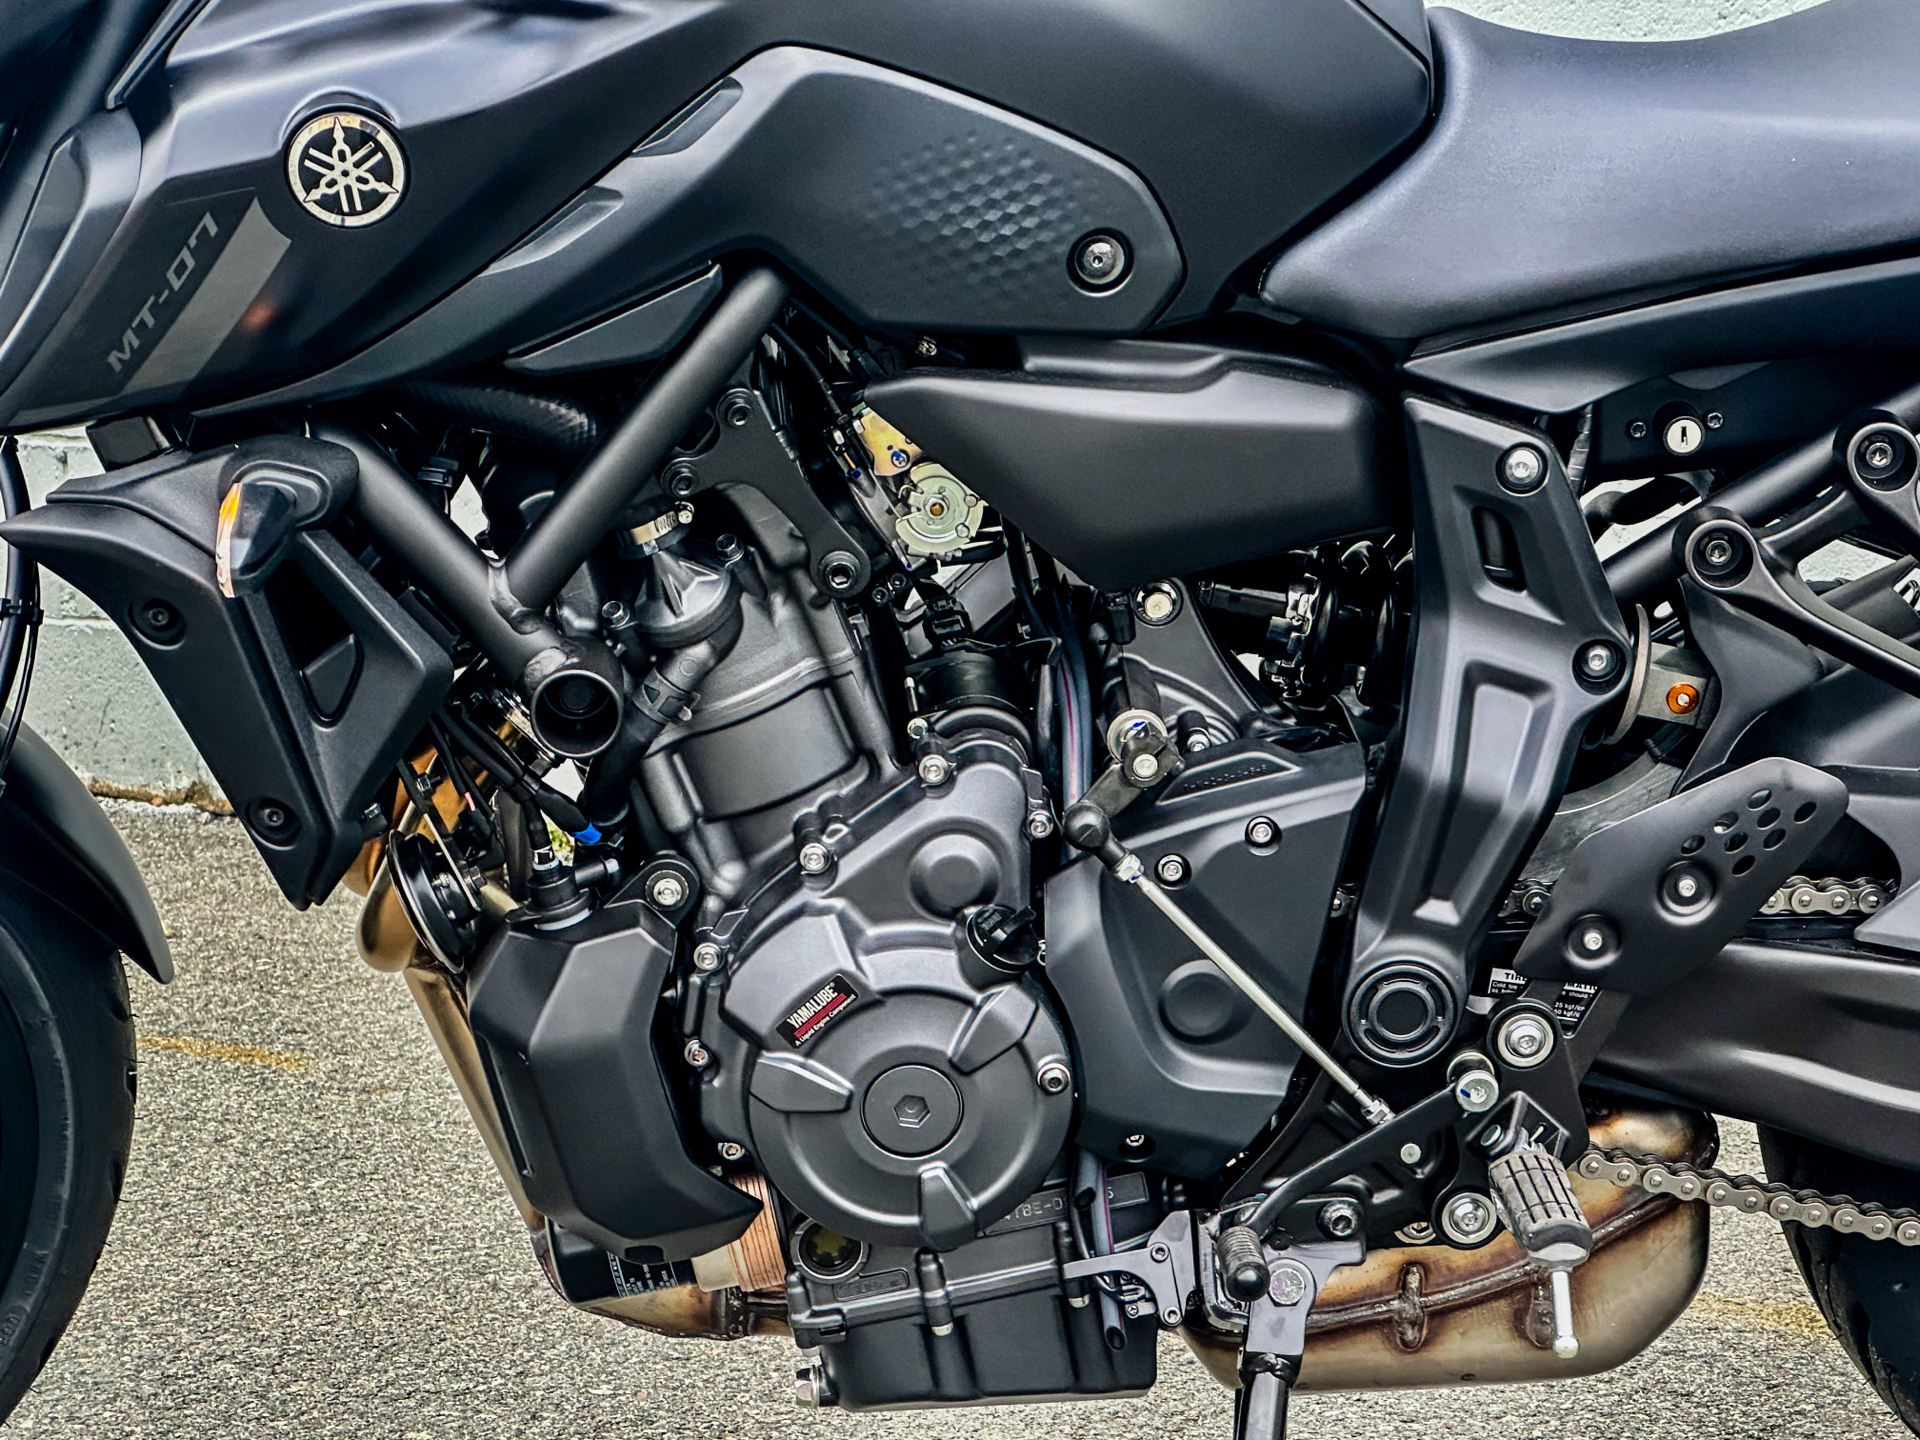 2024 Yamaha MT-07 in Manchester, New Hampshire - Photo 7